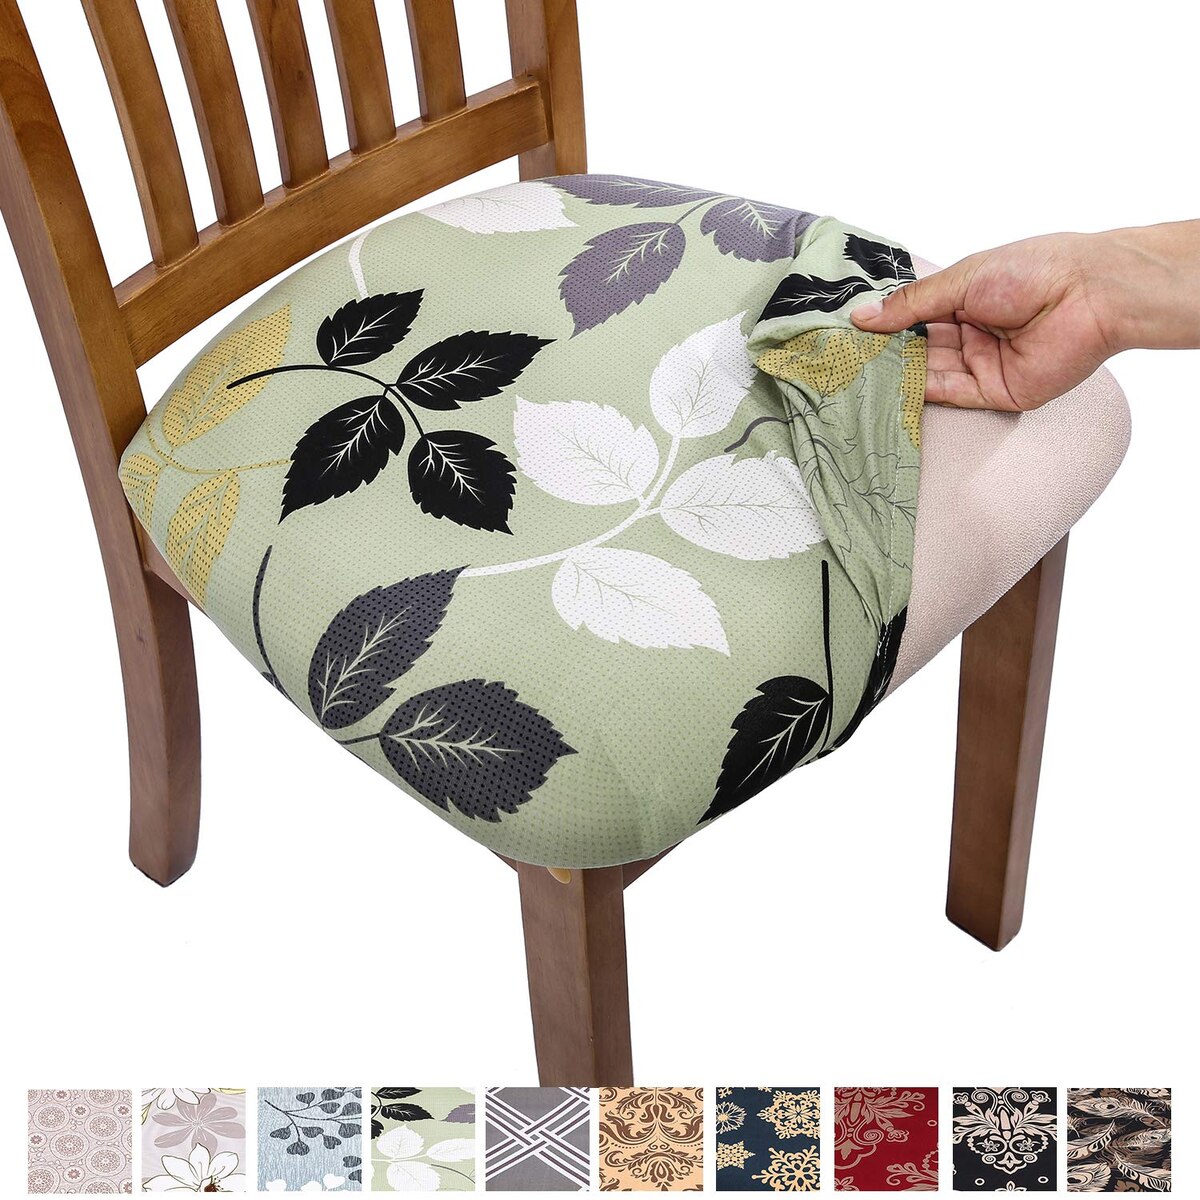 How To Make Seat Covers For Dining Chairs